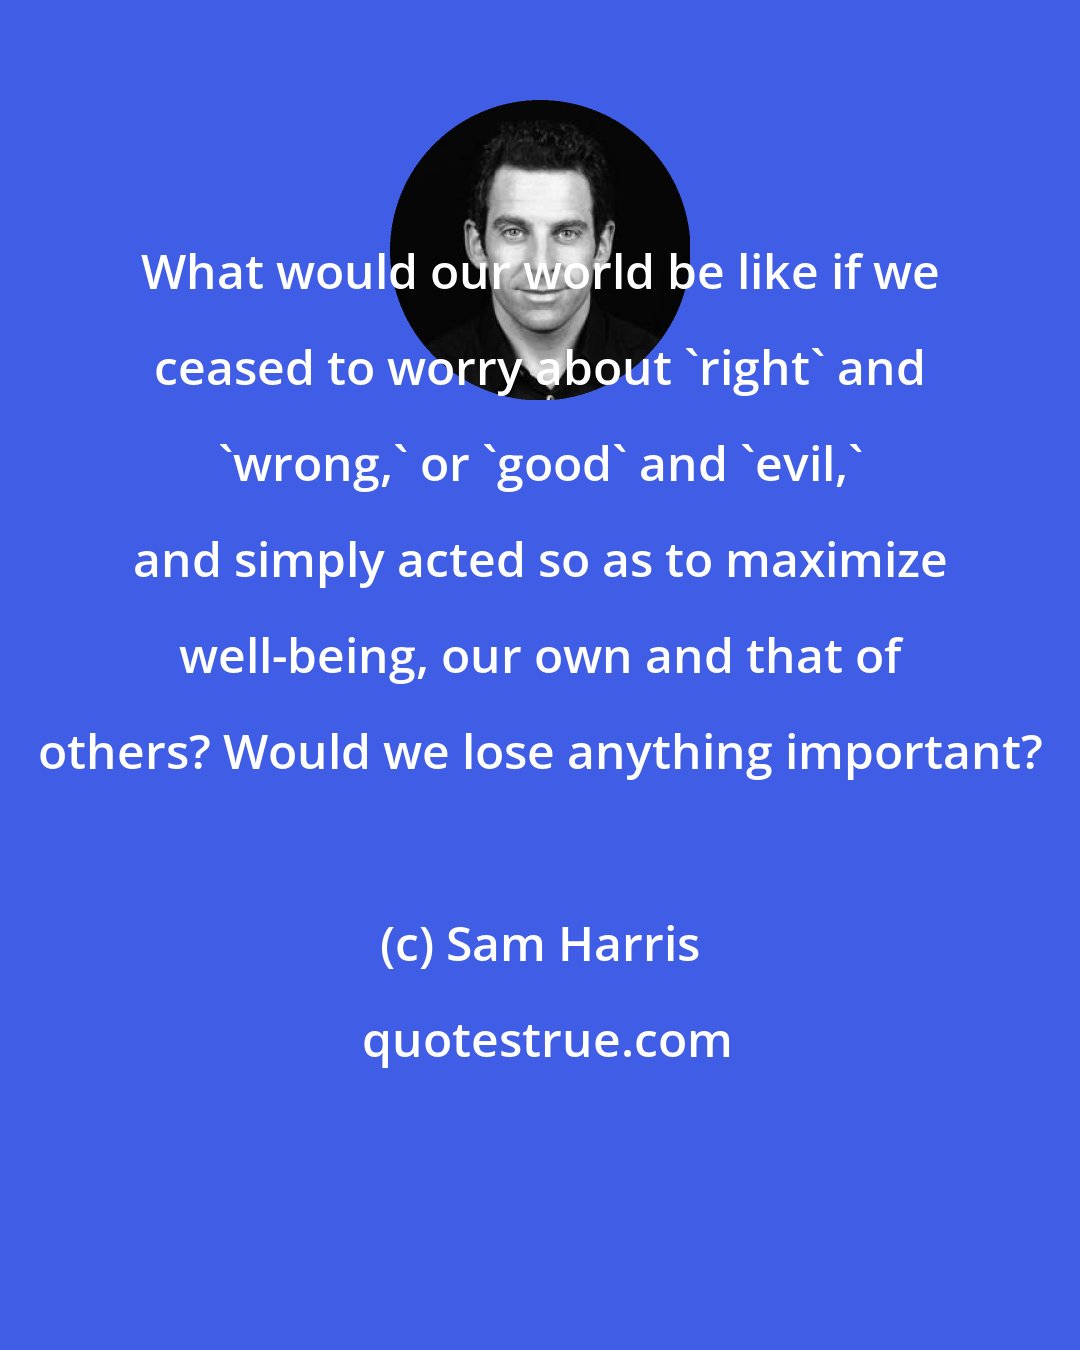 Sam Harris: What would our world be like if we ceased to worry about 'right' and 'wrong,' or 'good' and 'evil,' and simply acted so as to maximize well-being, our own and that of others? Would we lose anything important?